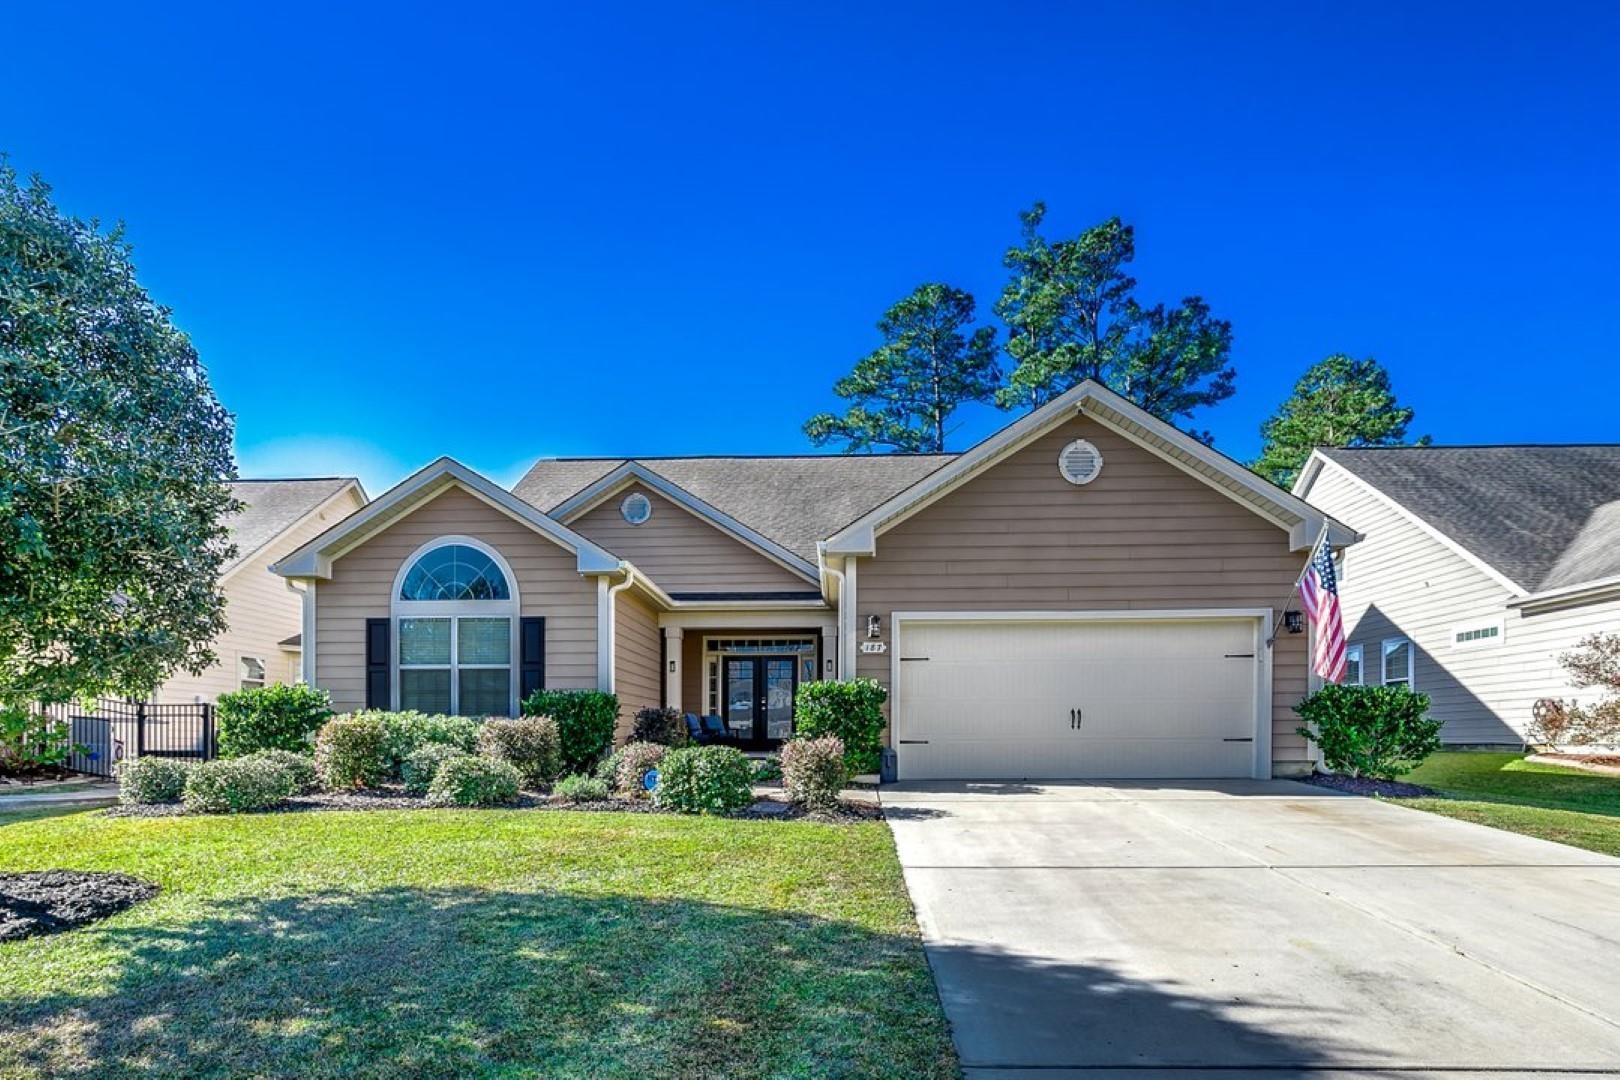 187 Rivers Edge Dr. Conway, SC 29526